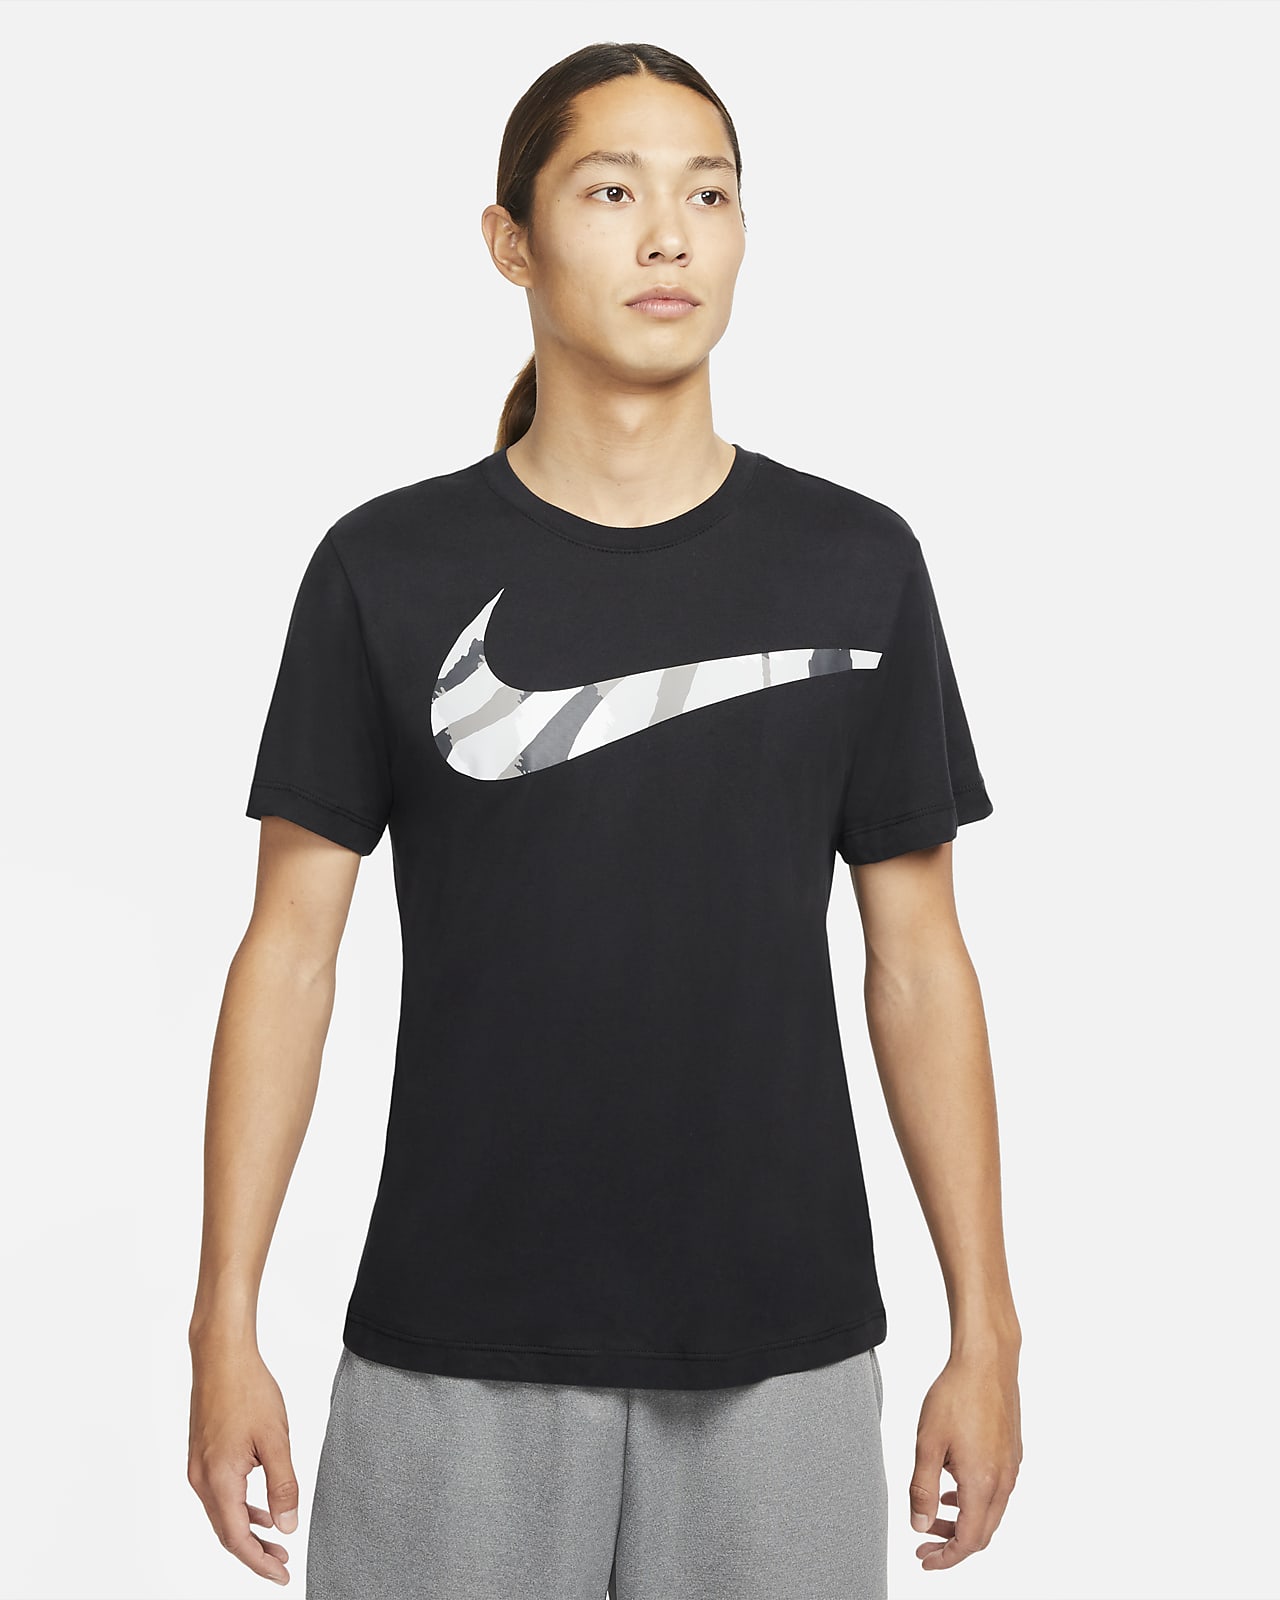 architect Zoom in component Nike Dri-FIT Sport Clash Men's Training T-Shirt. Nike IN